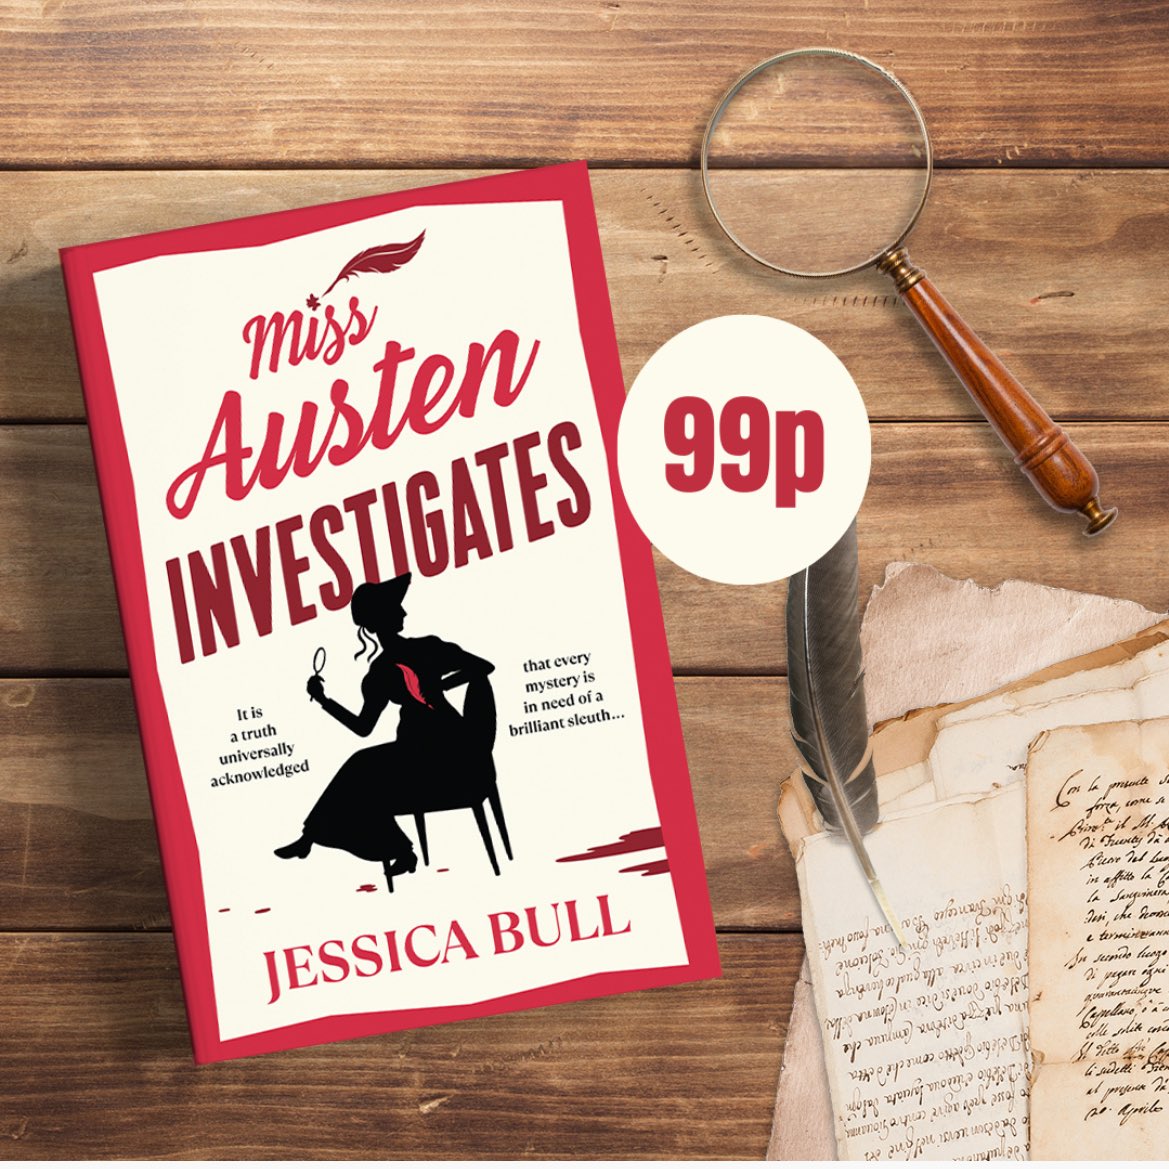 Don’t miss your chance to grab a copy of #MissAustenInvestigates for 99p: it’s only prudent that one’s next read is the Kindle Daily Deal. Please RT to spread some Austen joy!